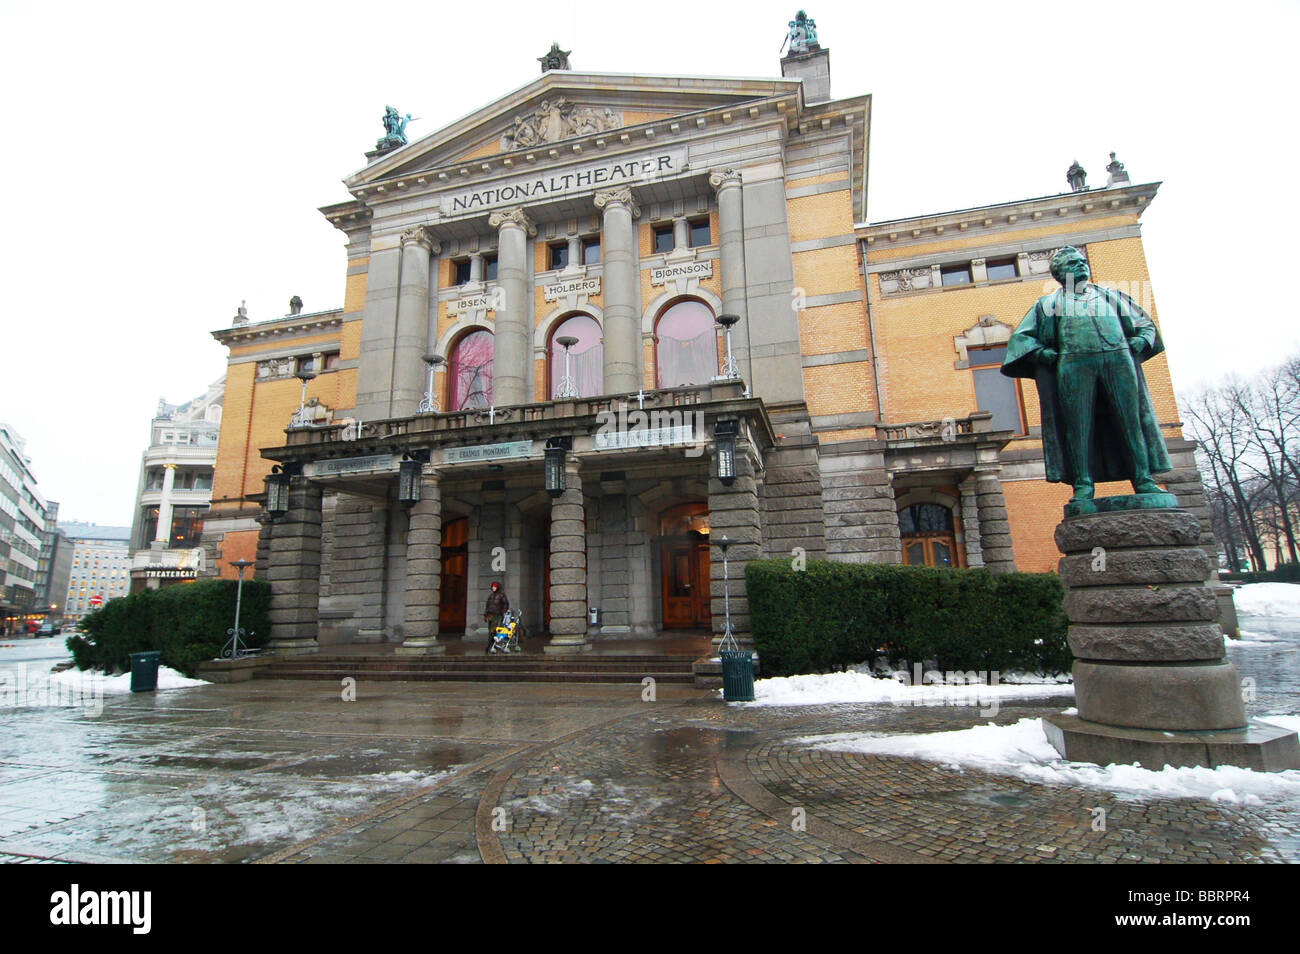 The National theater, Oslo, Norway Stock Photo